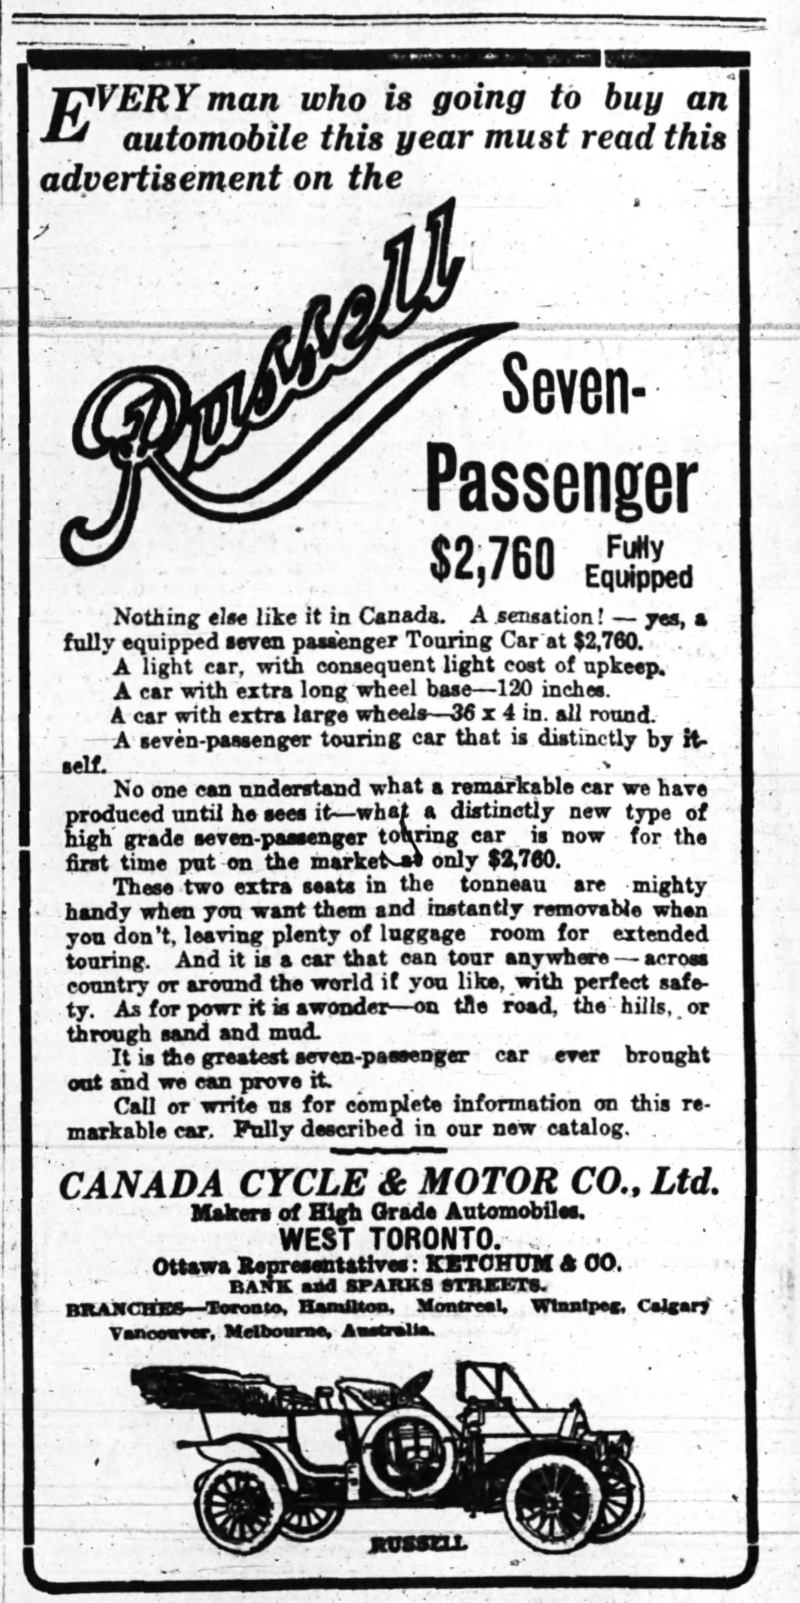 1910 Russell ad